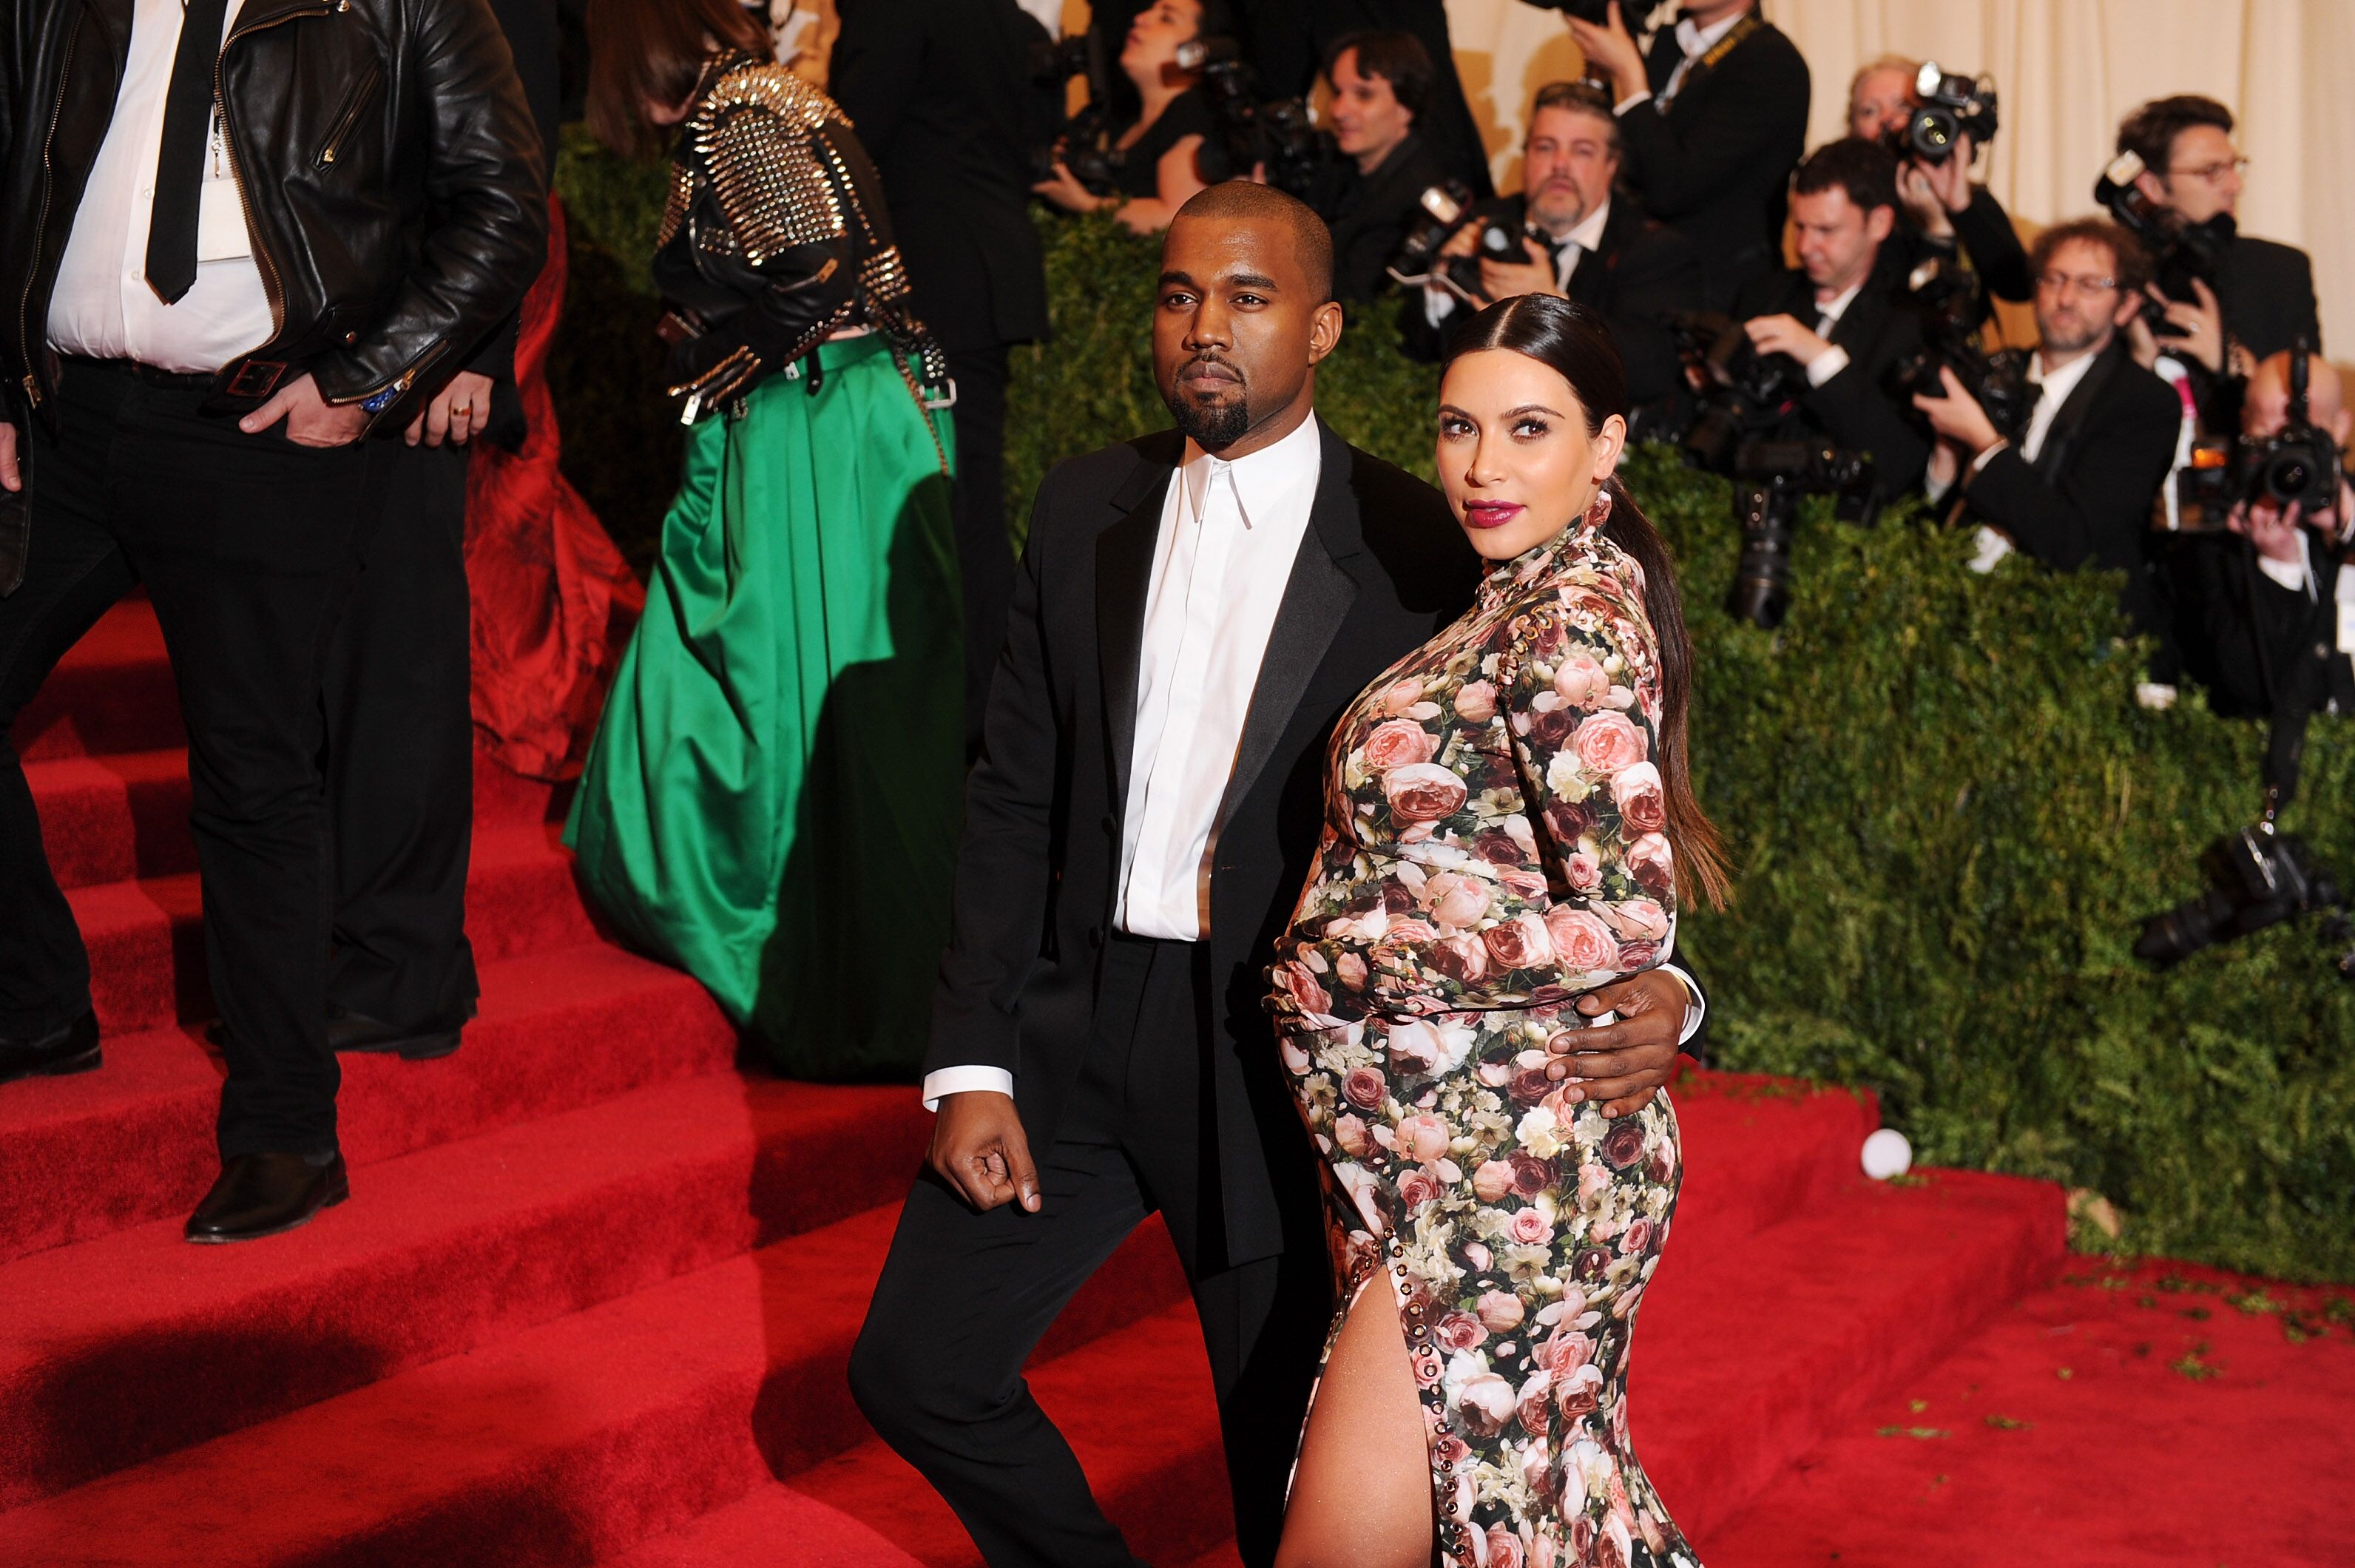 Kim Kardashian and Kanye West attend the MET Gala | Source: Getty Images/GlobalImagesUkraine